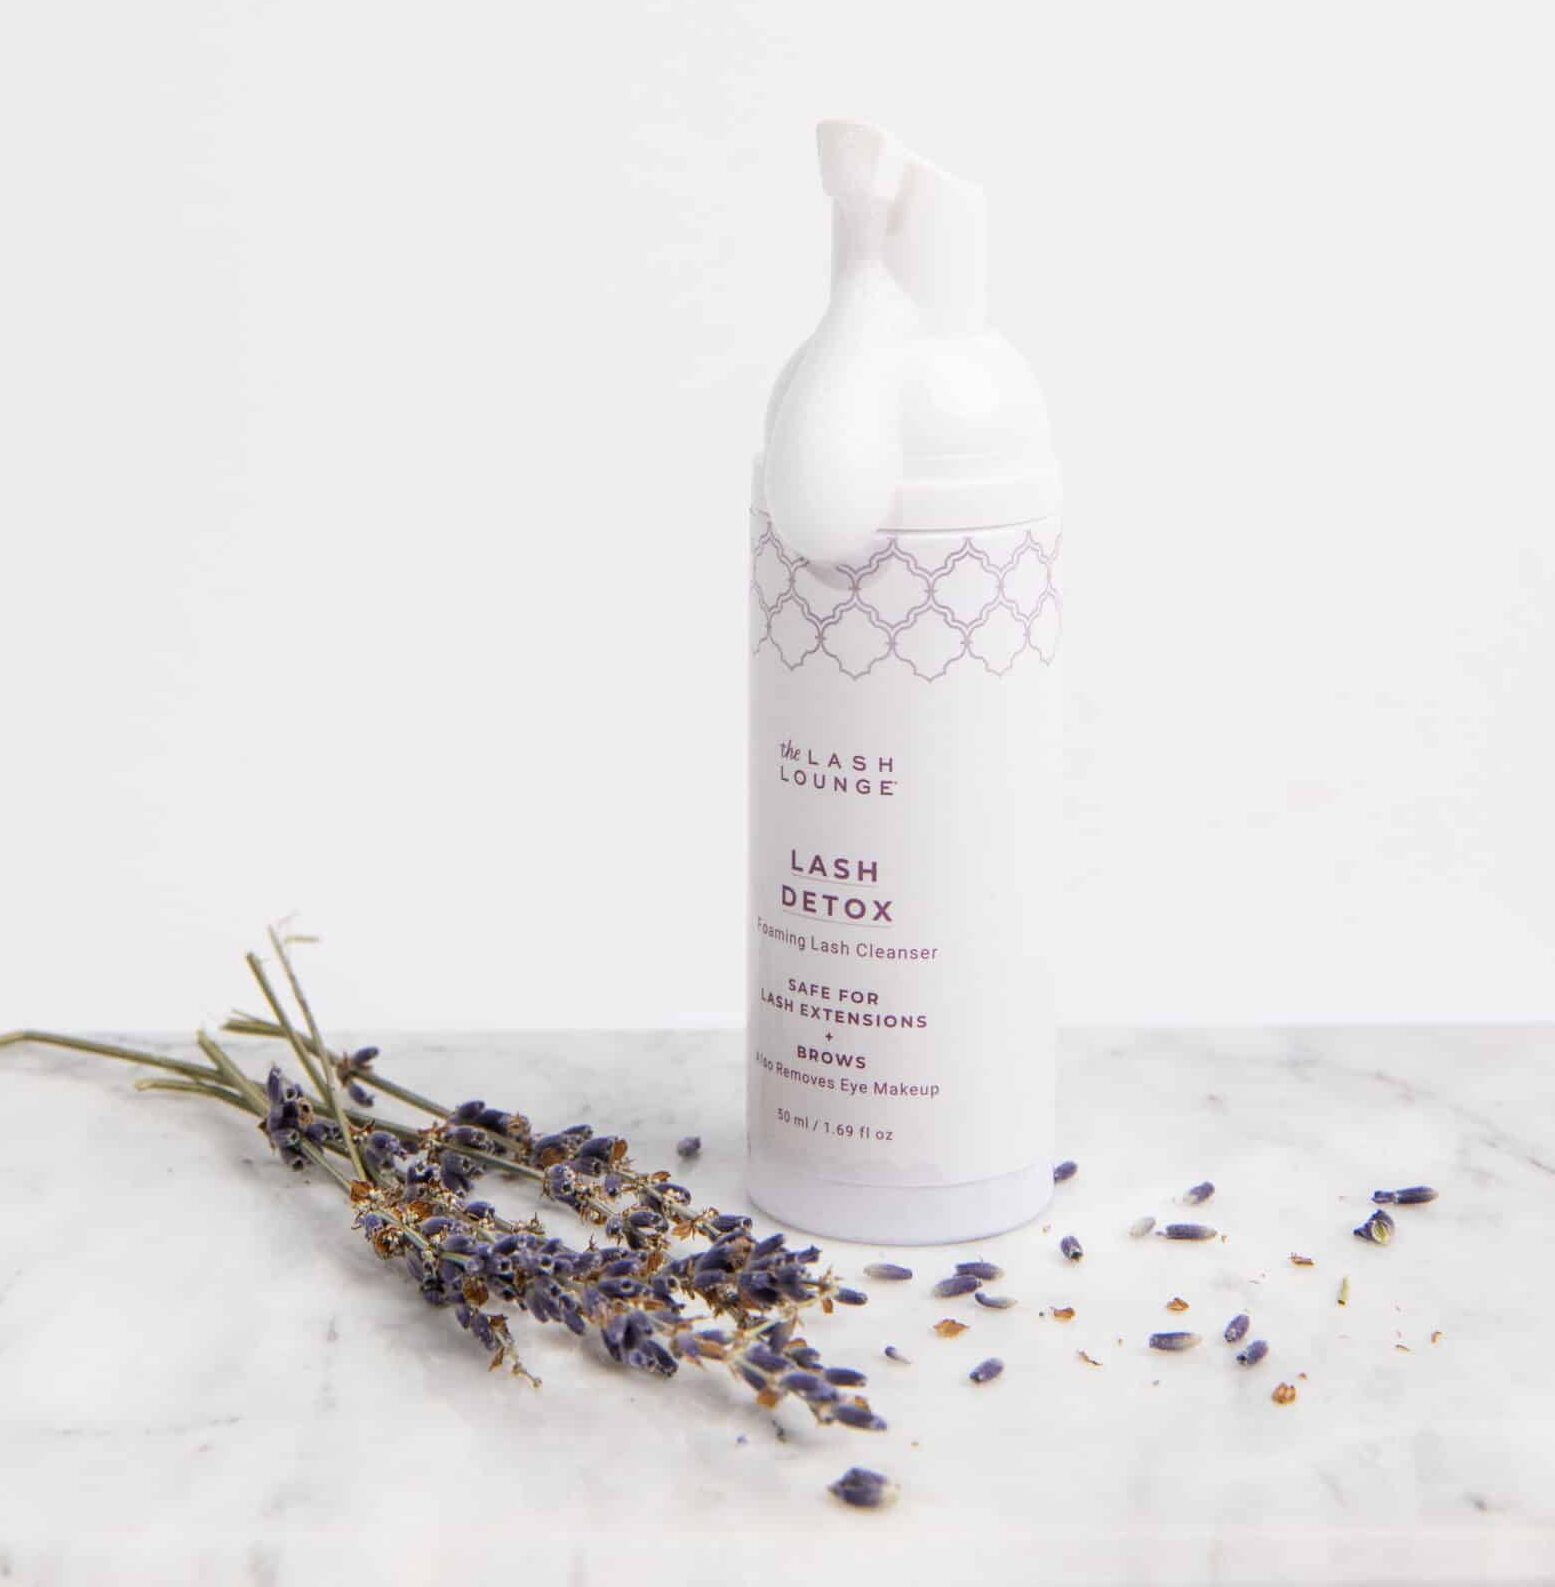 Lash Detox foaming cleanser product sitting on a marble countertop with dried lavender surrounding the product.